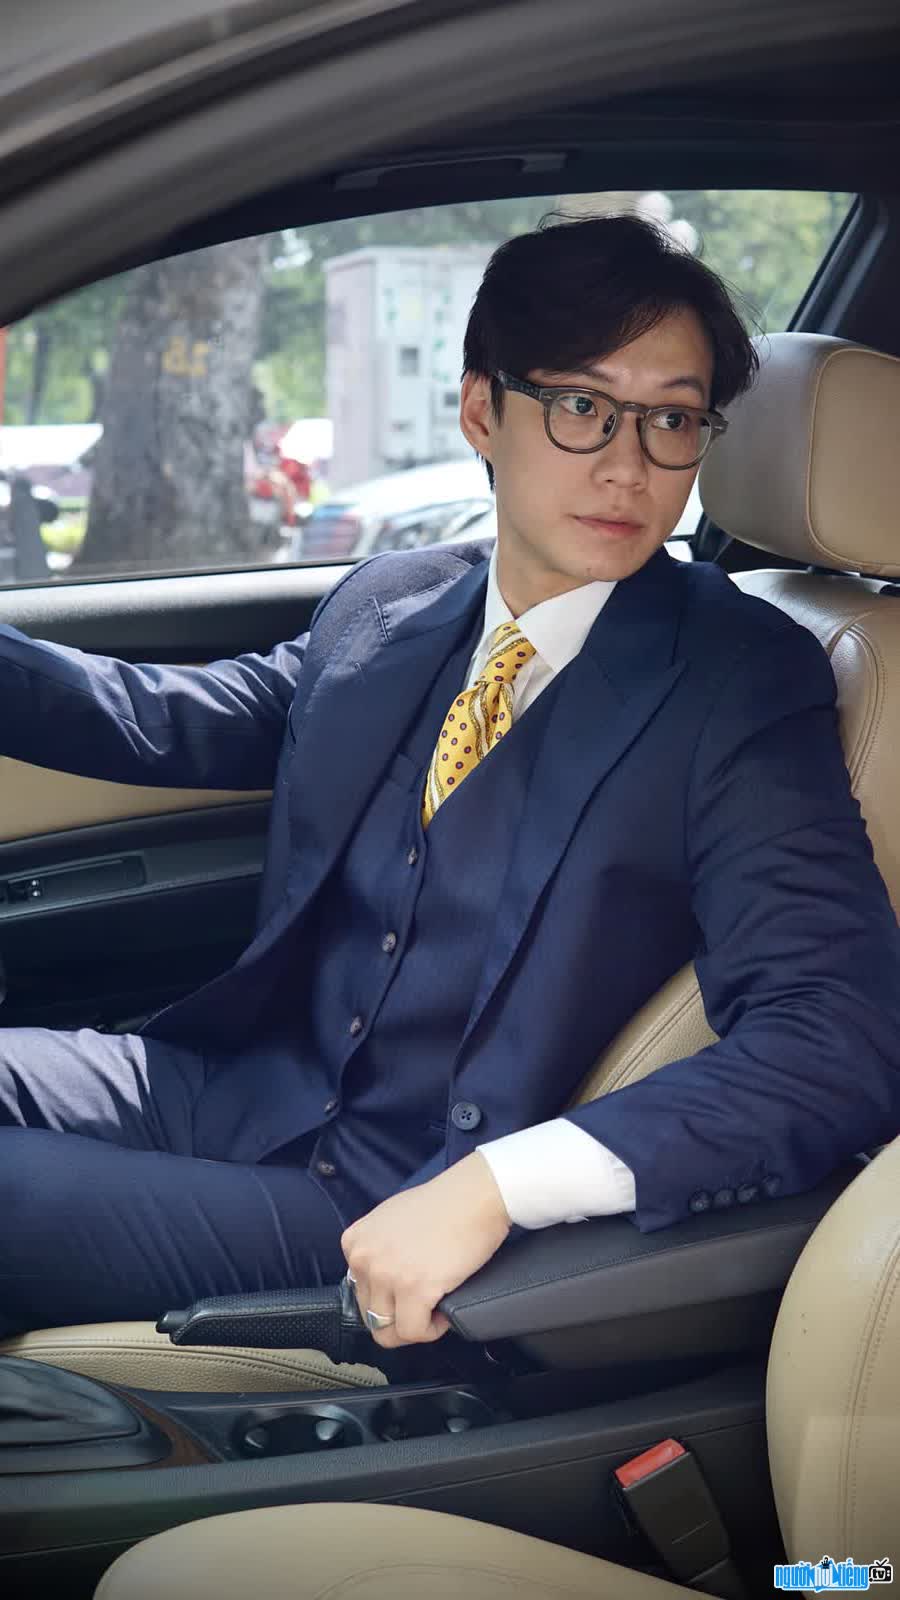 Le Thanh Hung is one of the prominent faces pursuing Sartorial fashion style